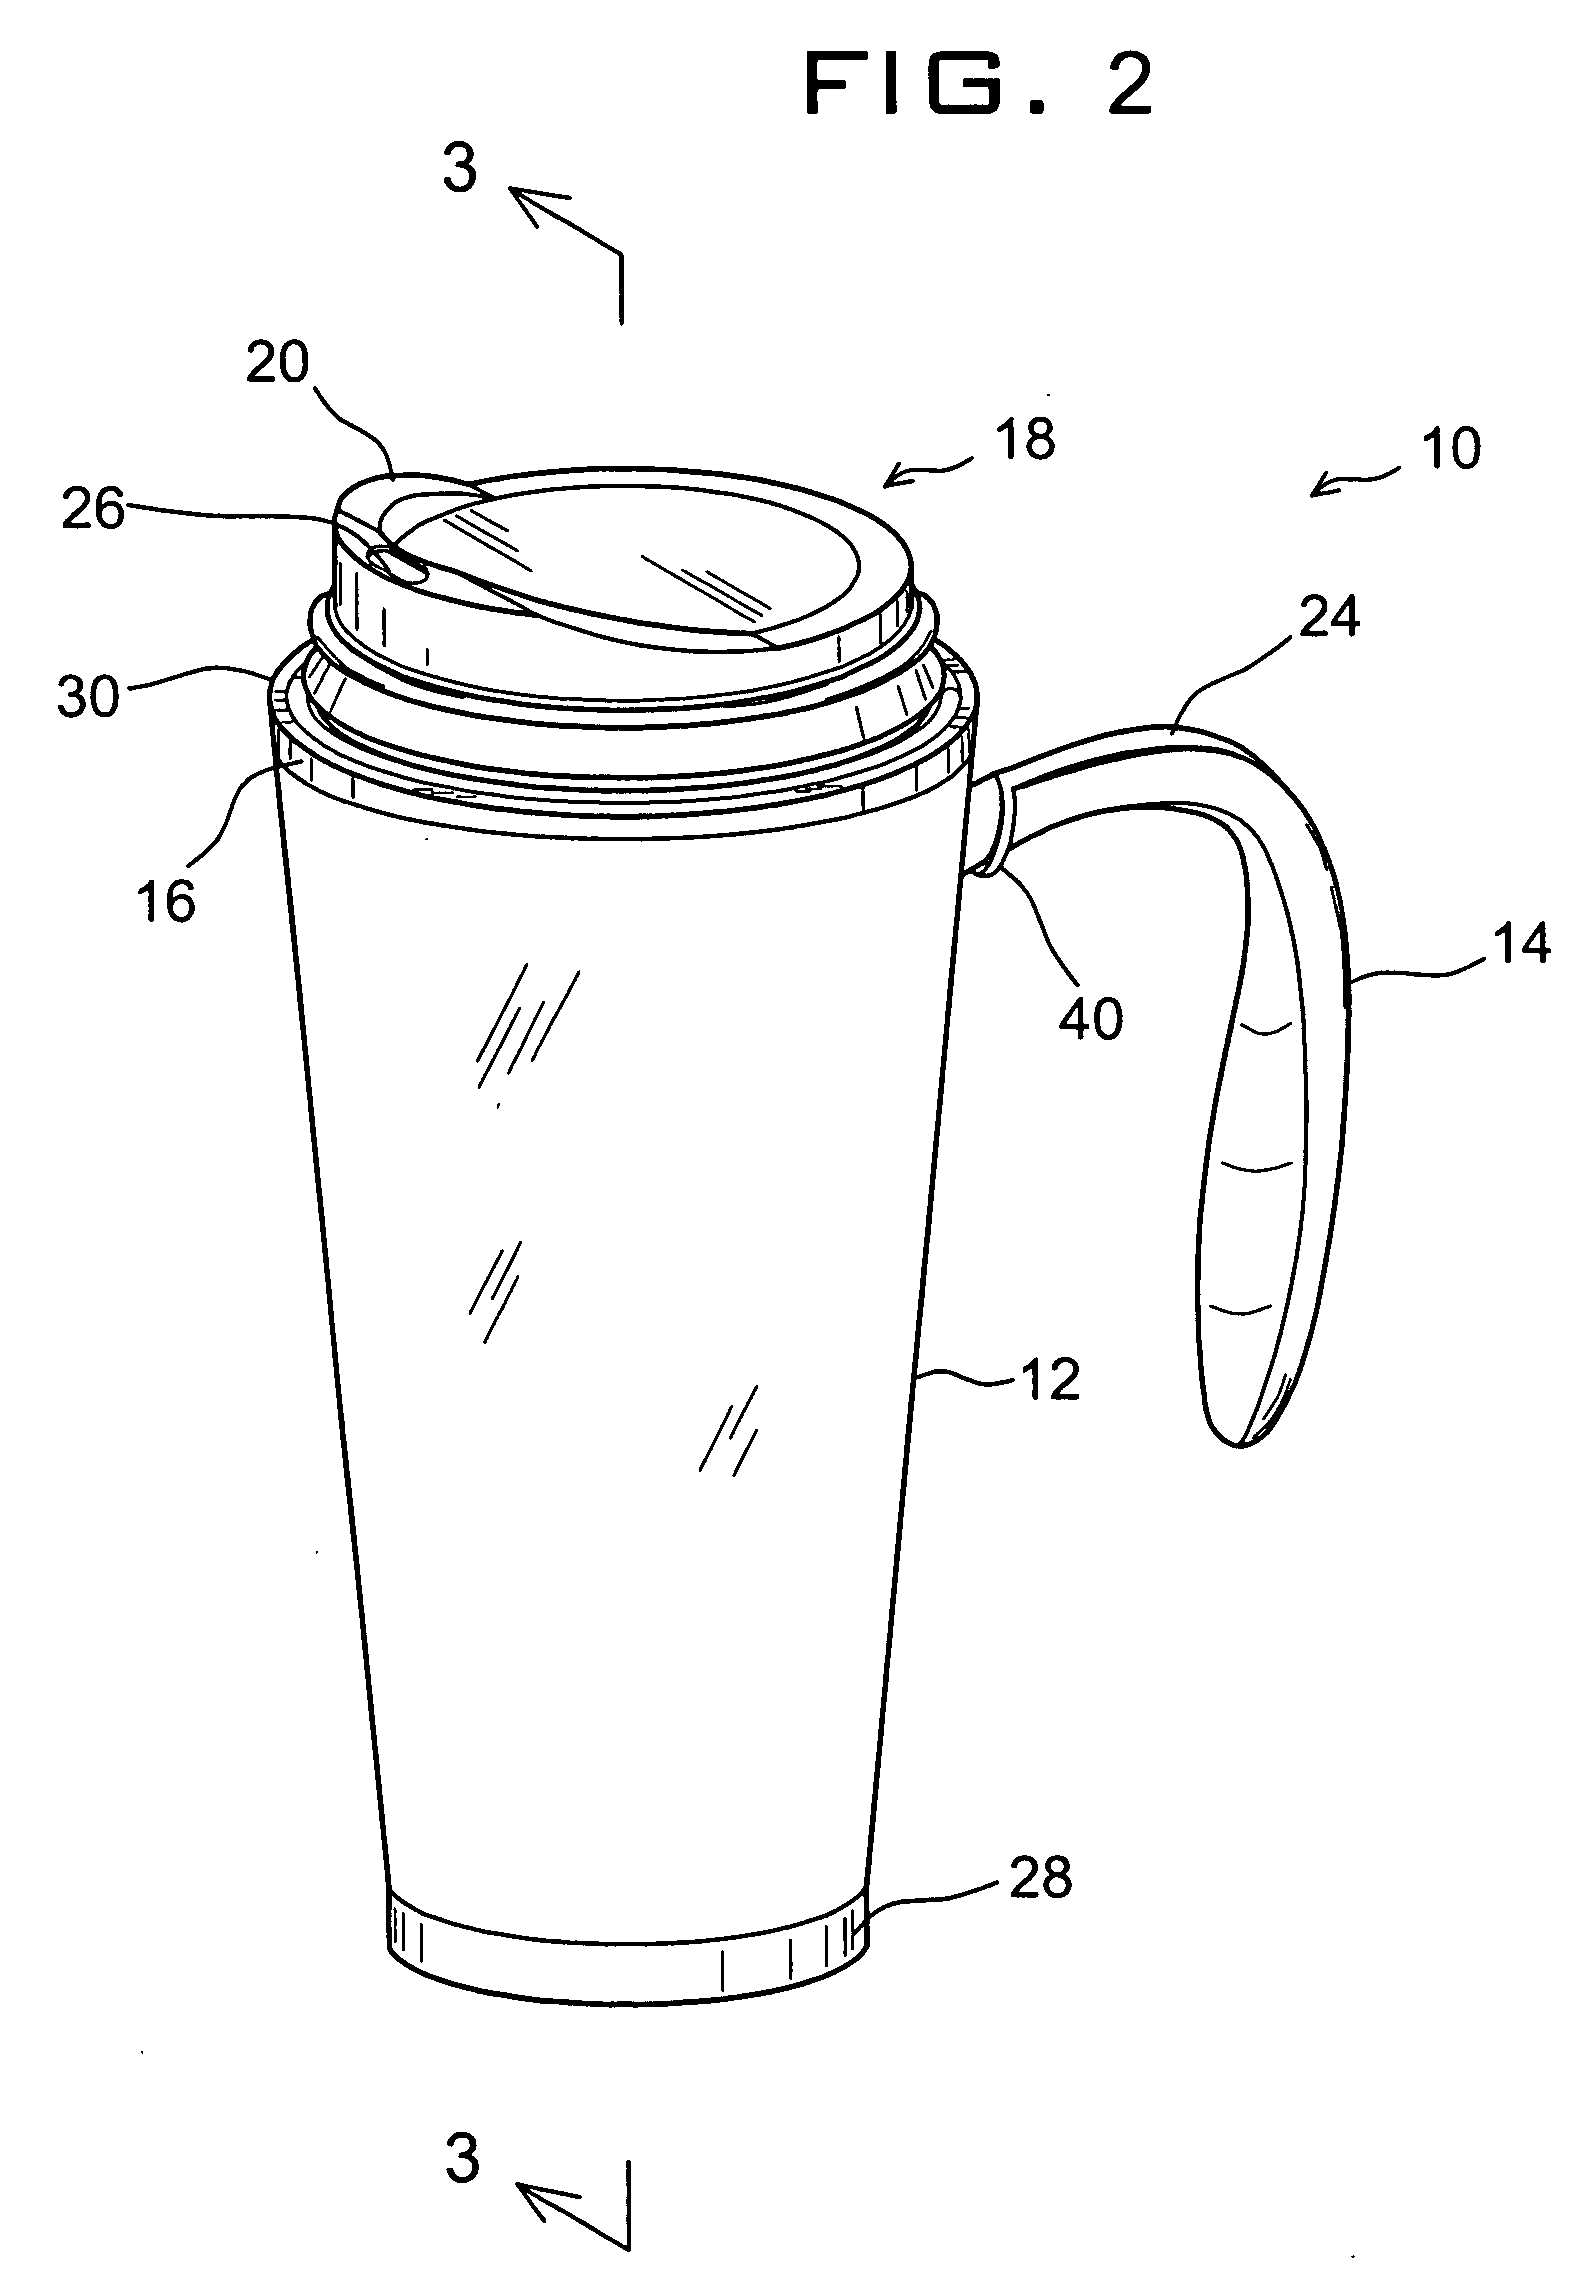 Insulated container